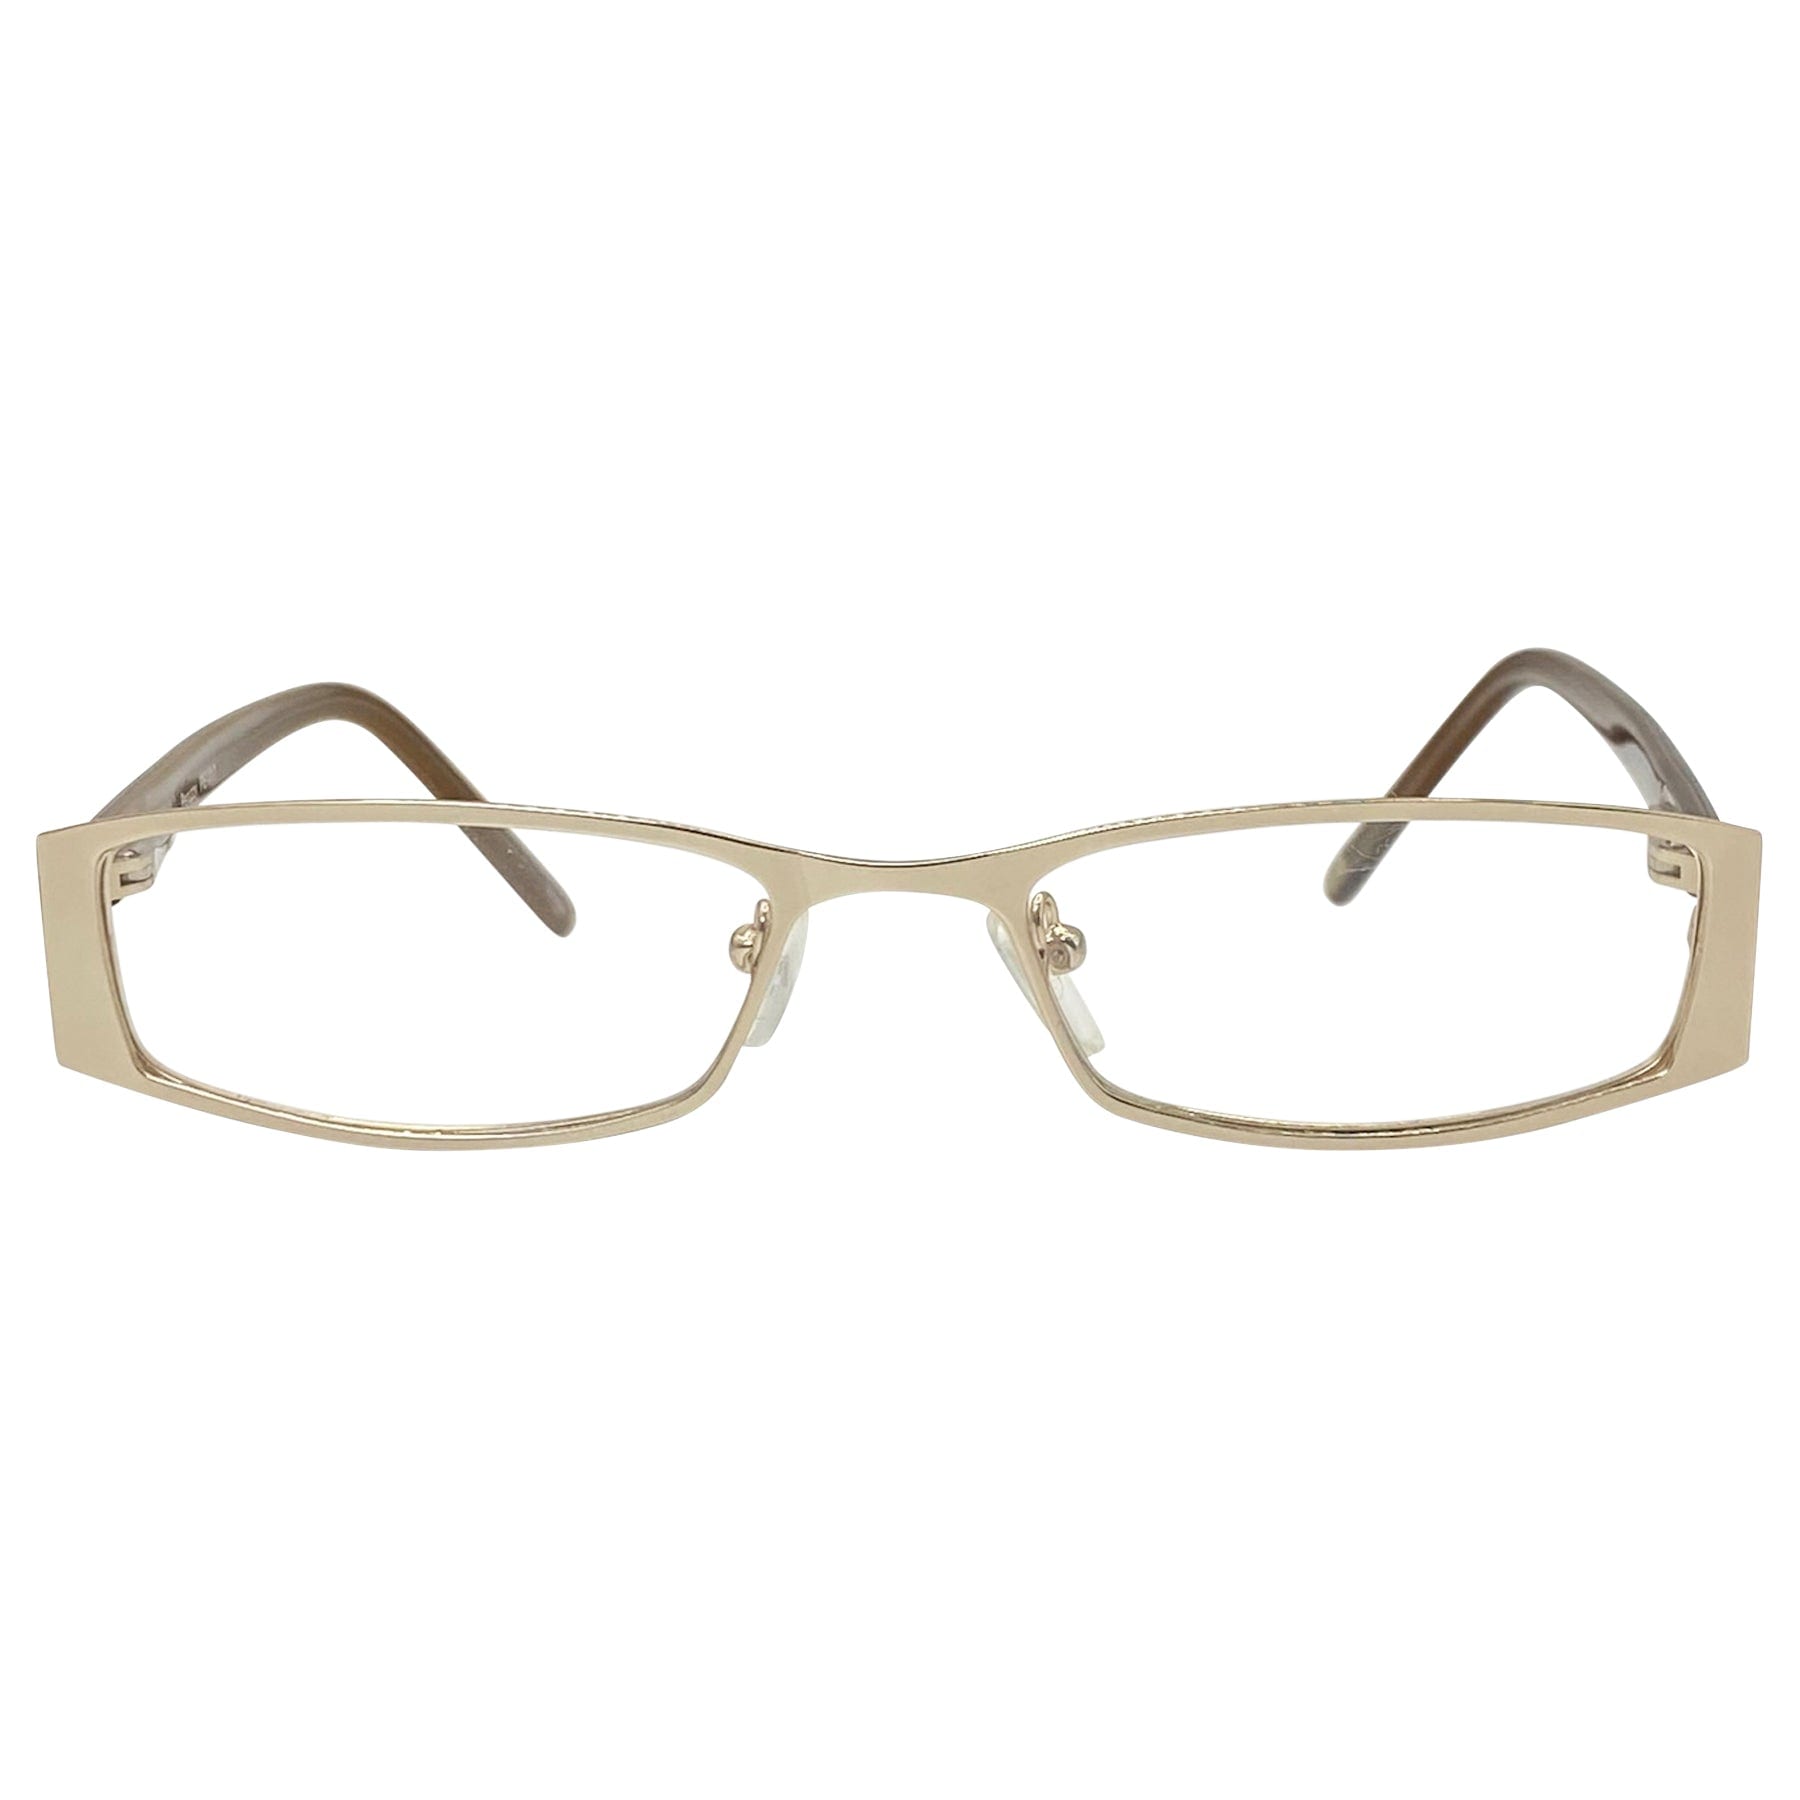 vintage frames with a gold metal and rectangular 90s style